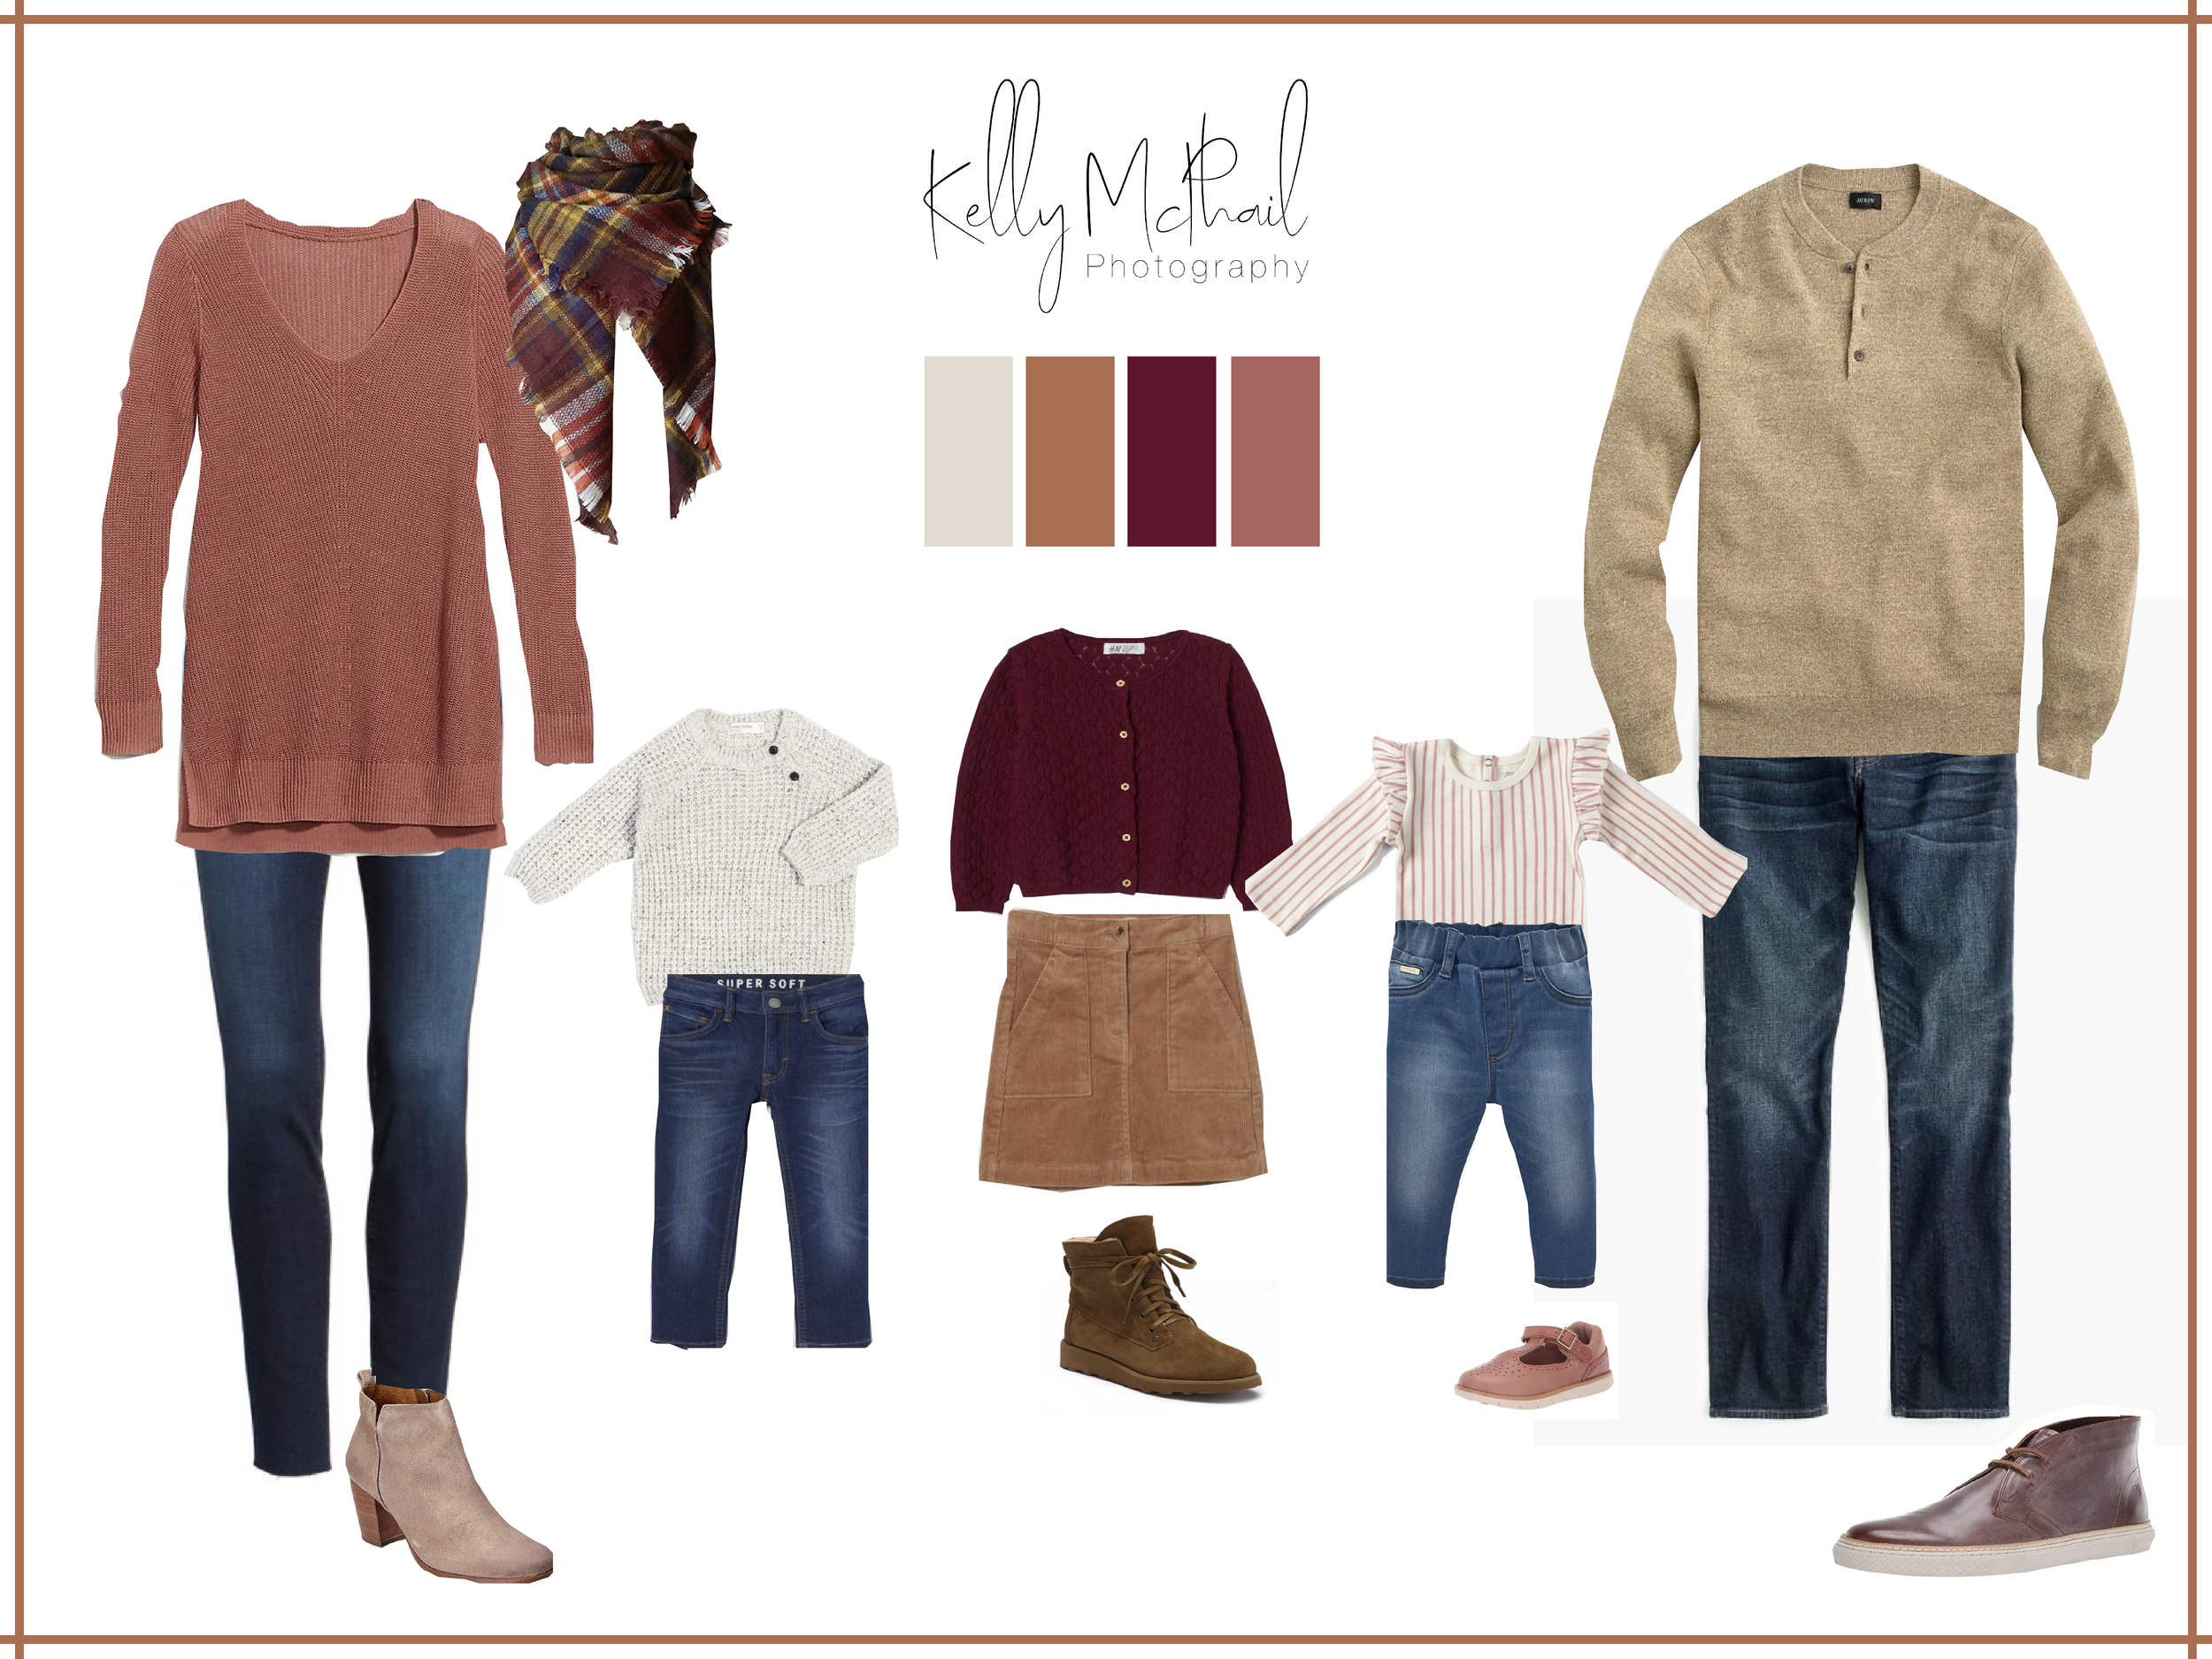 Summer/fall family outfit ideas for family photoshoot with browns, gold, navy blue, and tans.